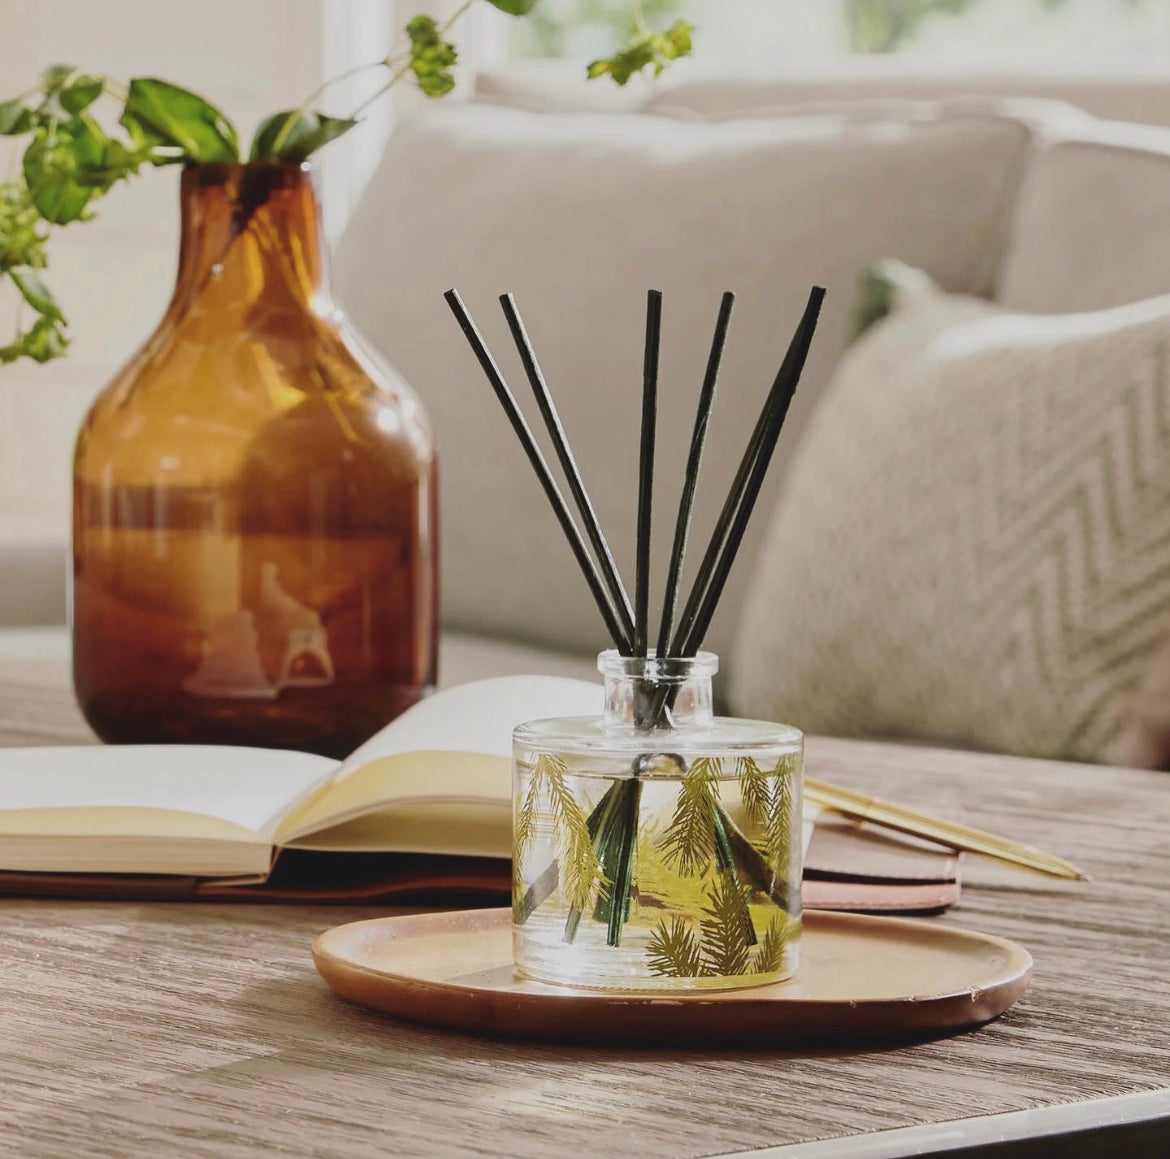 Frasier Fir Pine Needle Reed Diffuser | Thymes